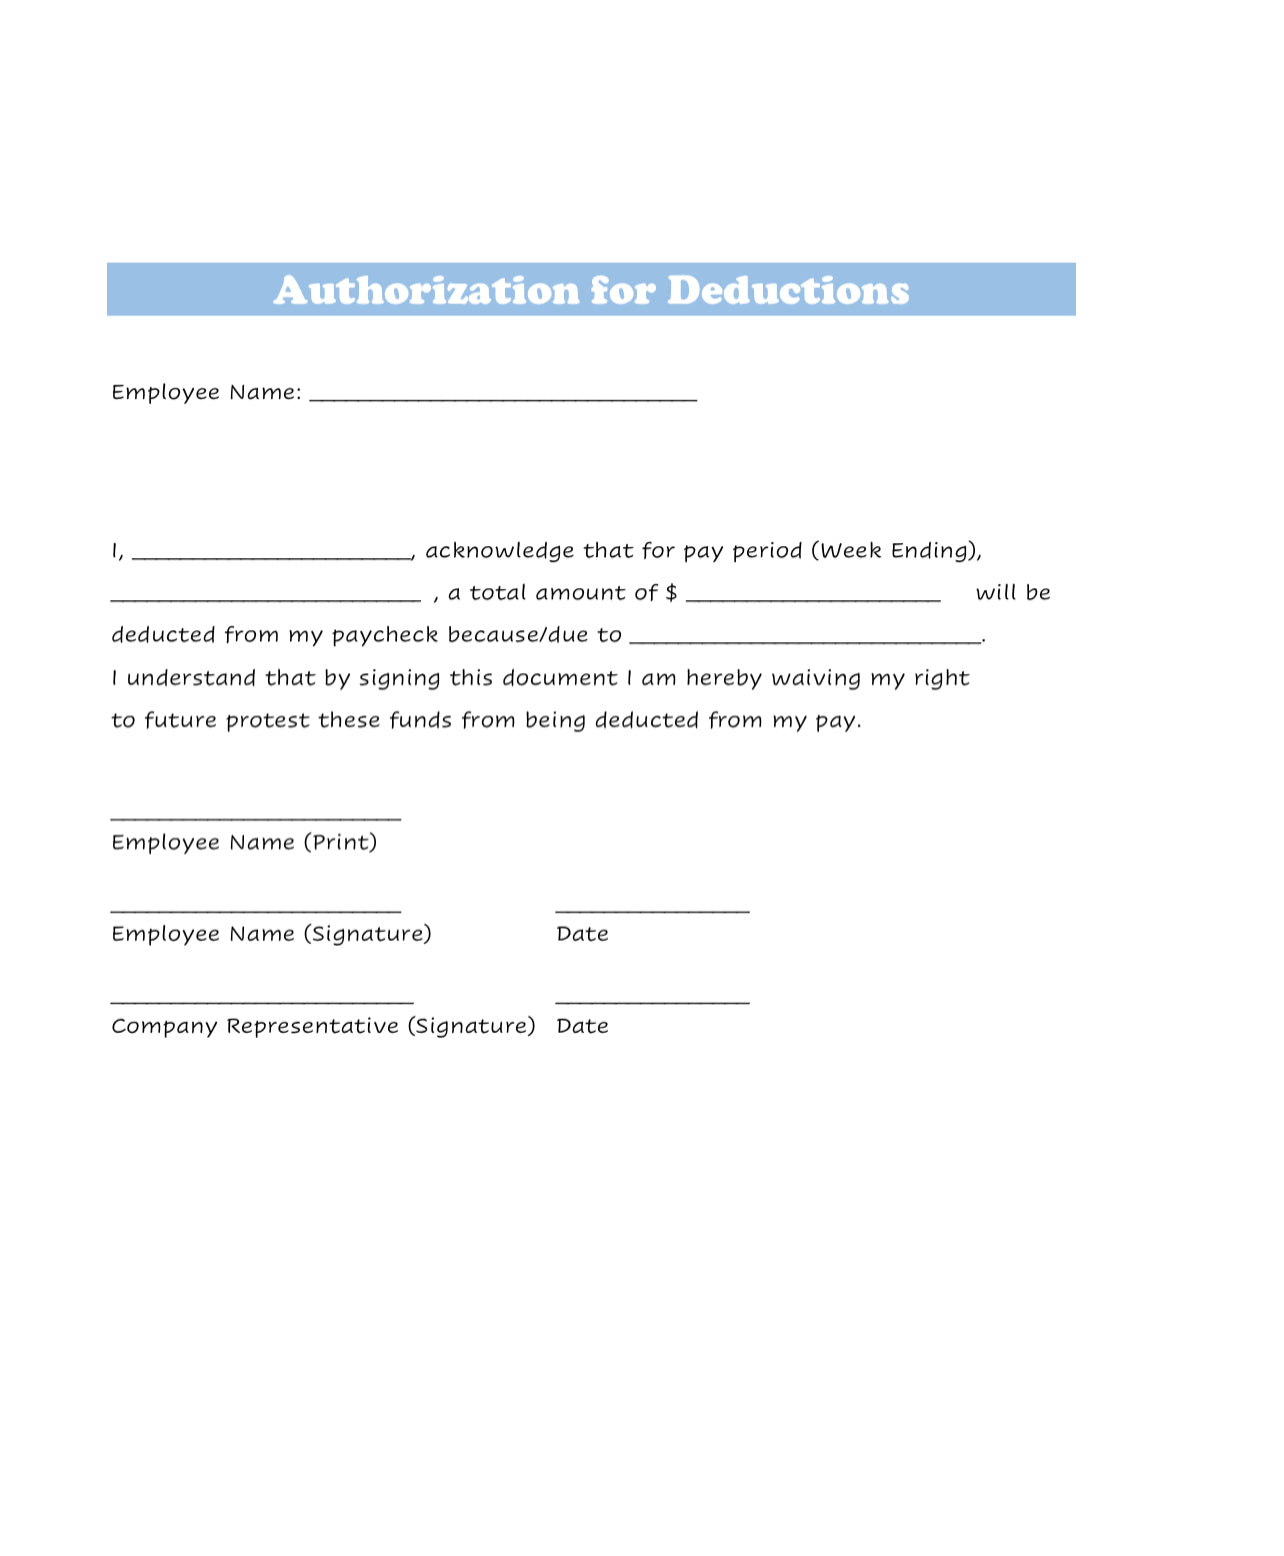 Authorization for a Deduction from Payroll